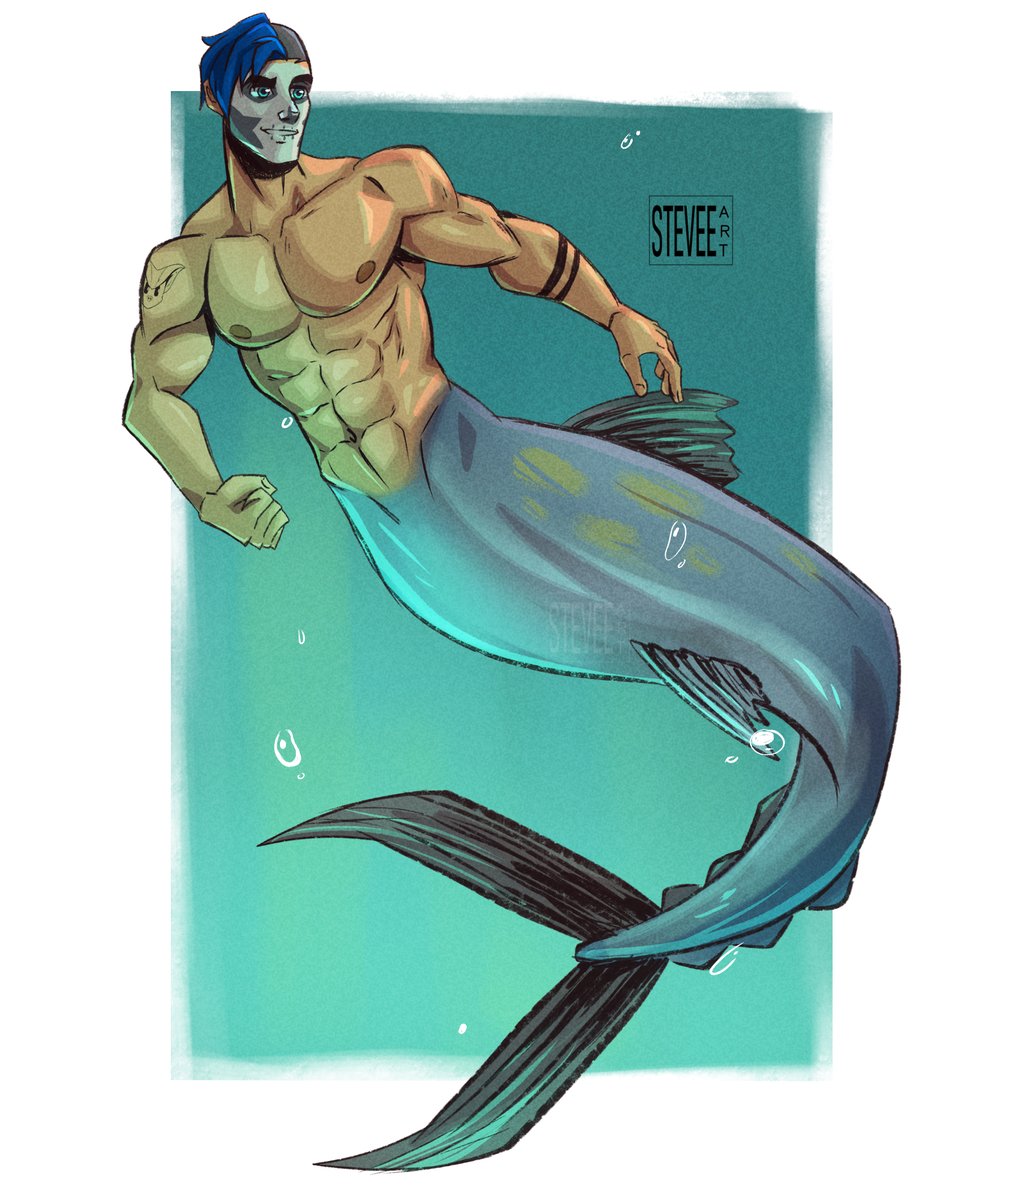 First time commissioning Johnny as a mermaid. What do you think? #OC #ArtCommission